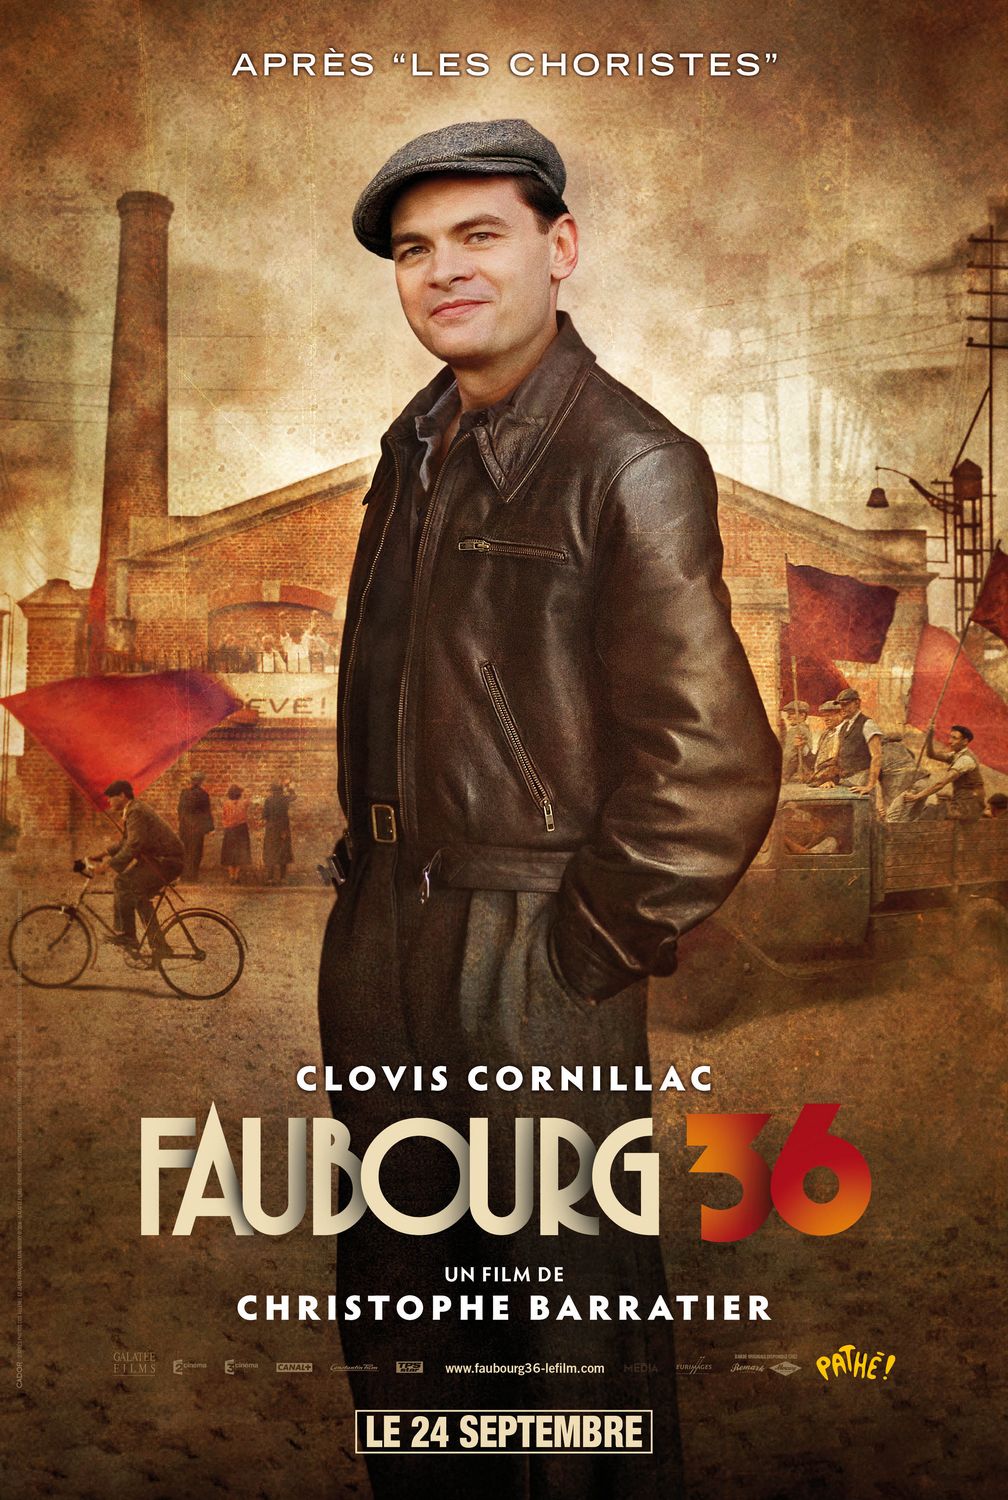 Extra Large Movie Poster Image for Faubourg 36 (#3 of 6)